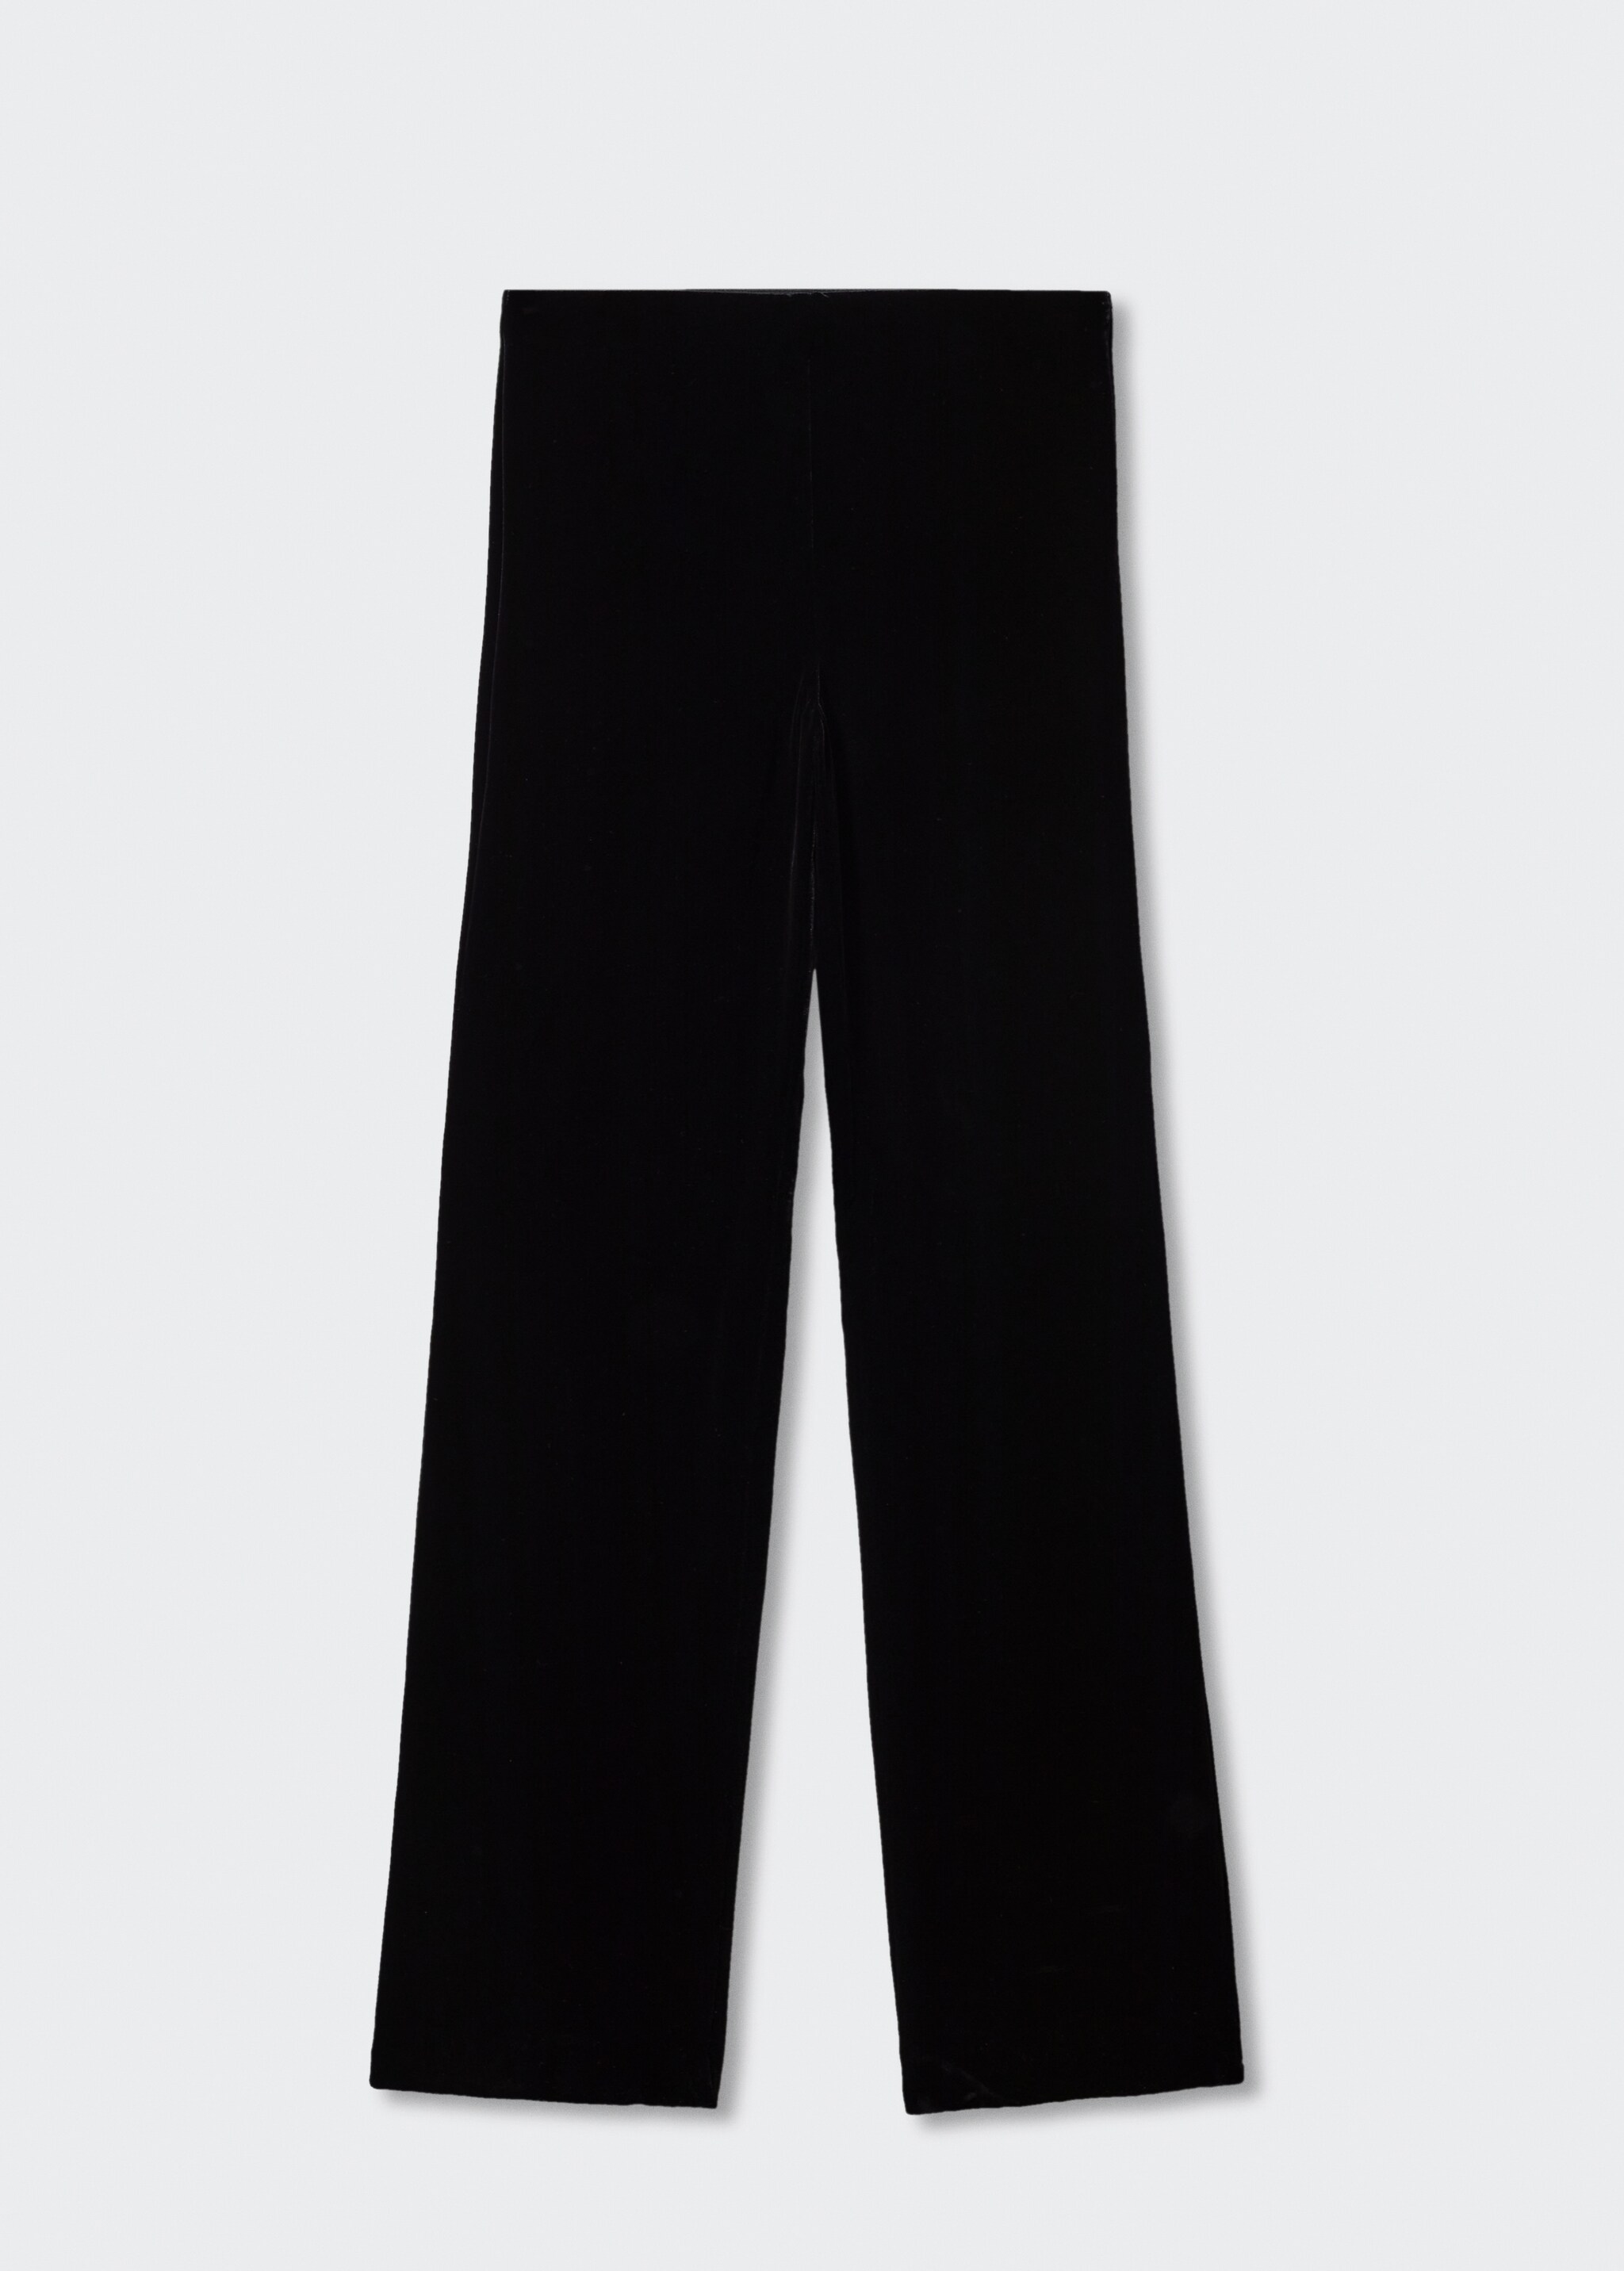 Velvet suit trousers - Article without model